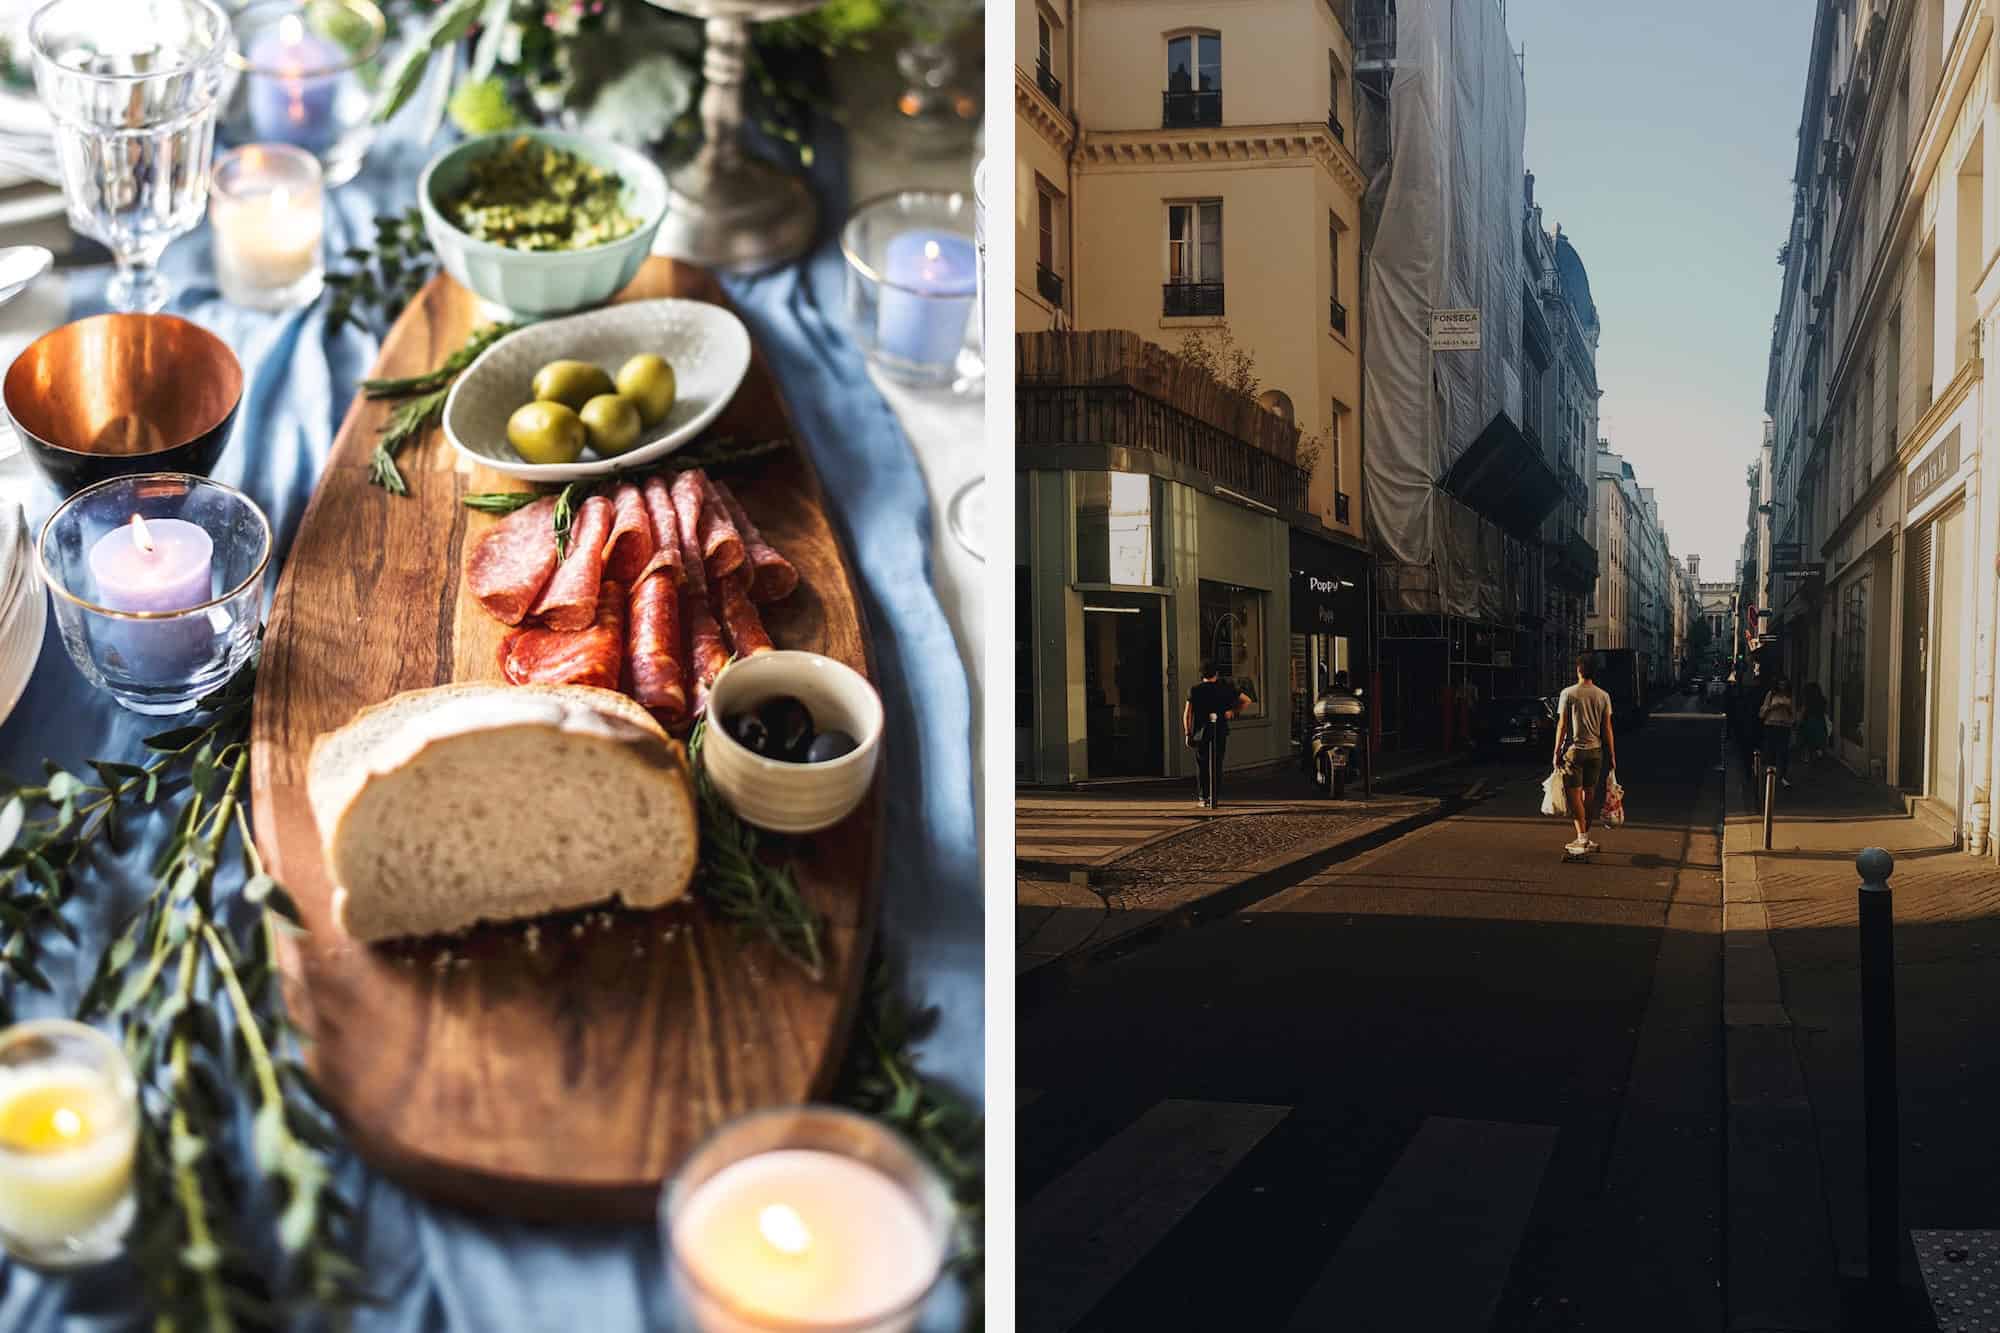 When eating with local Parisians, expect there to be lots of ham and bread (left). Dining at a local Parisian's apartment helps you discover new neighborhoods like this quiet off-the-beaten-track area (left).